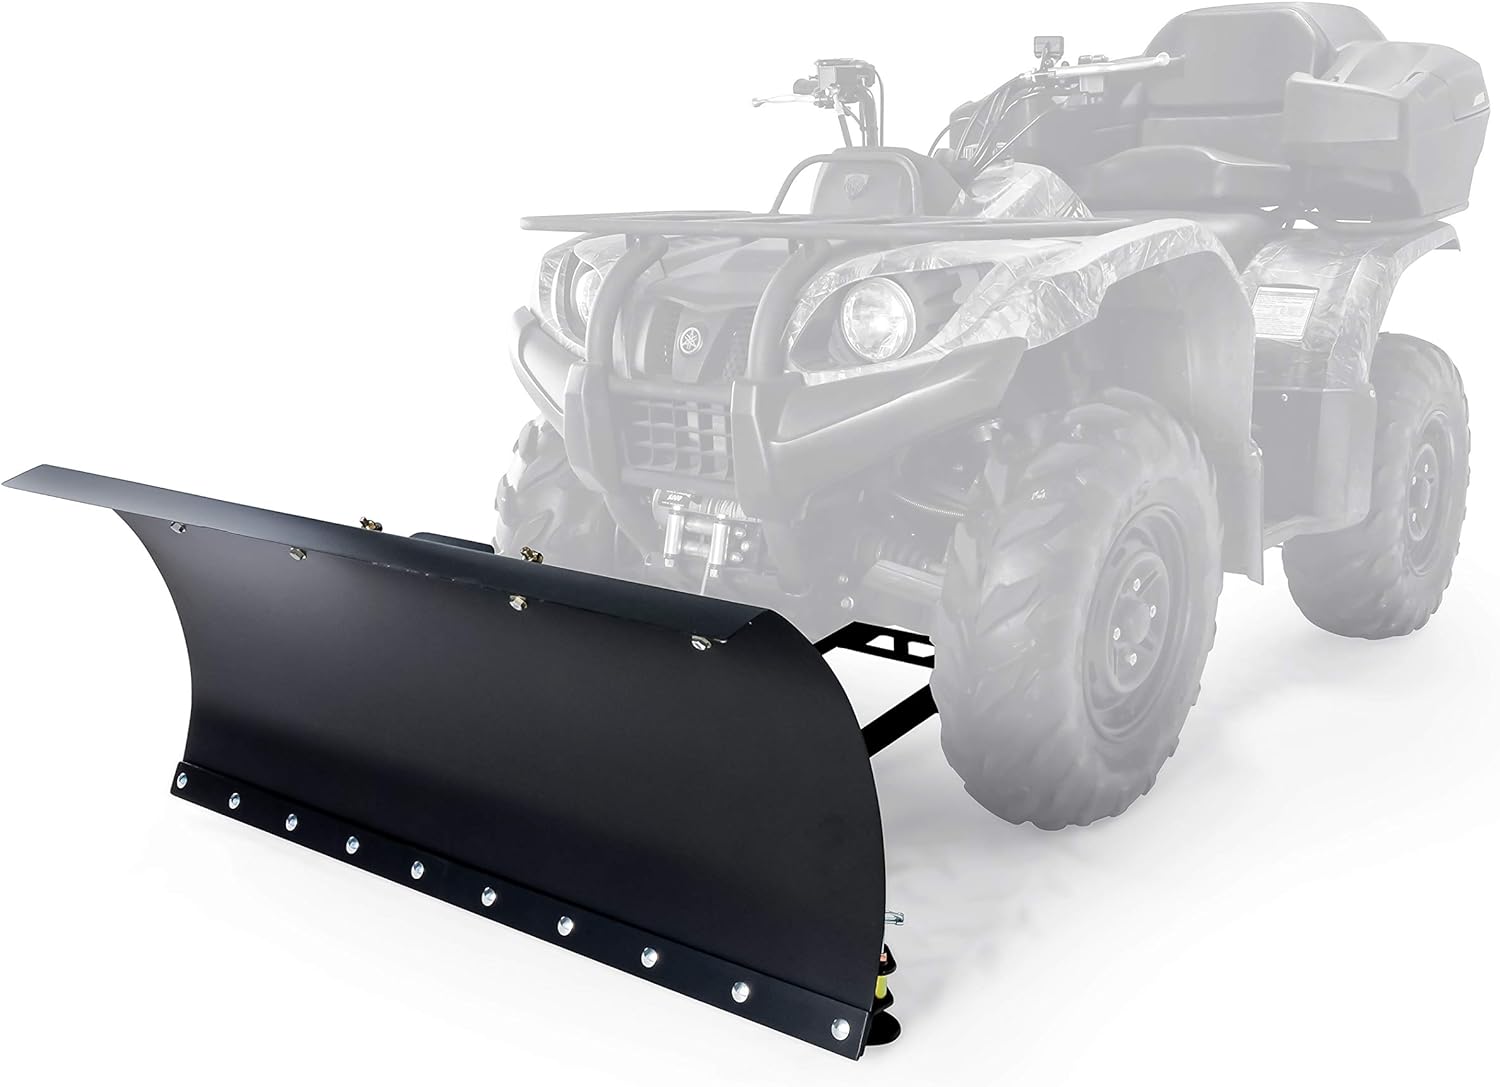 Black Boar Camco ATV Snow Plow Kit | Features a 48-inch Adjustable Straight Blade and Adjustable Tension Safety Trip Springs (66016)